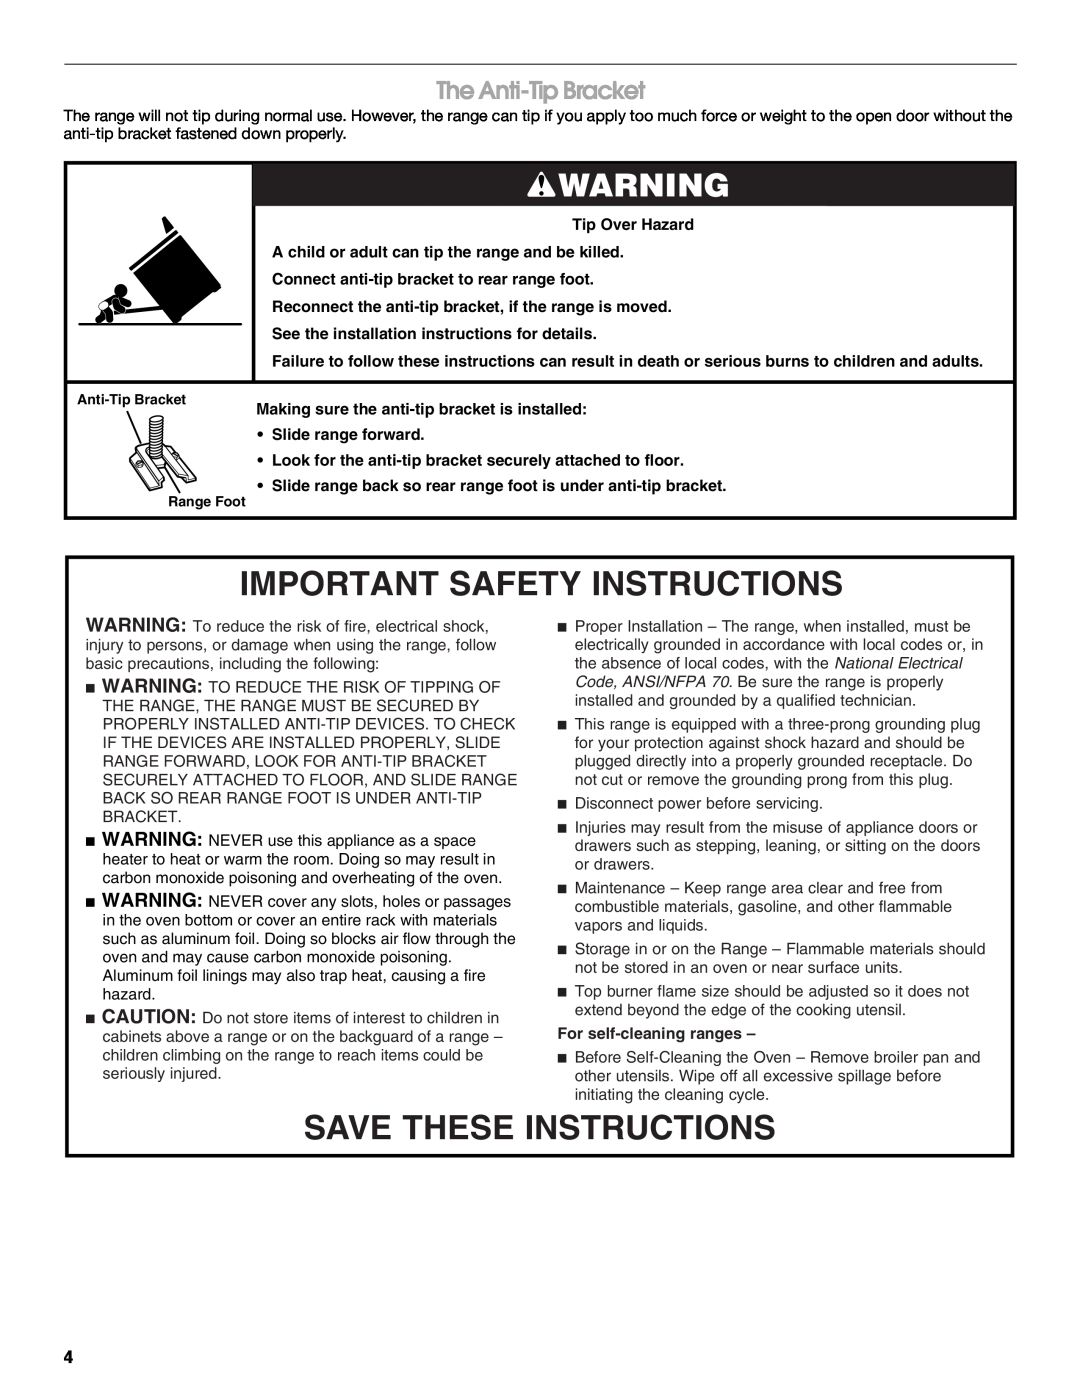 Estate W10173754A Important Safety Instructions, Save These Instructions, The Anti-Tip Bracket, For self-cleaning ranges 